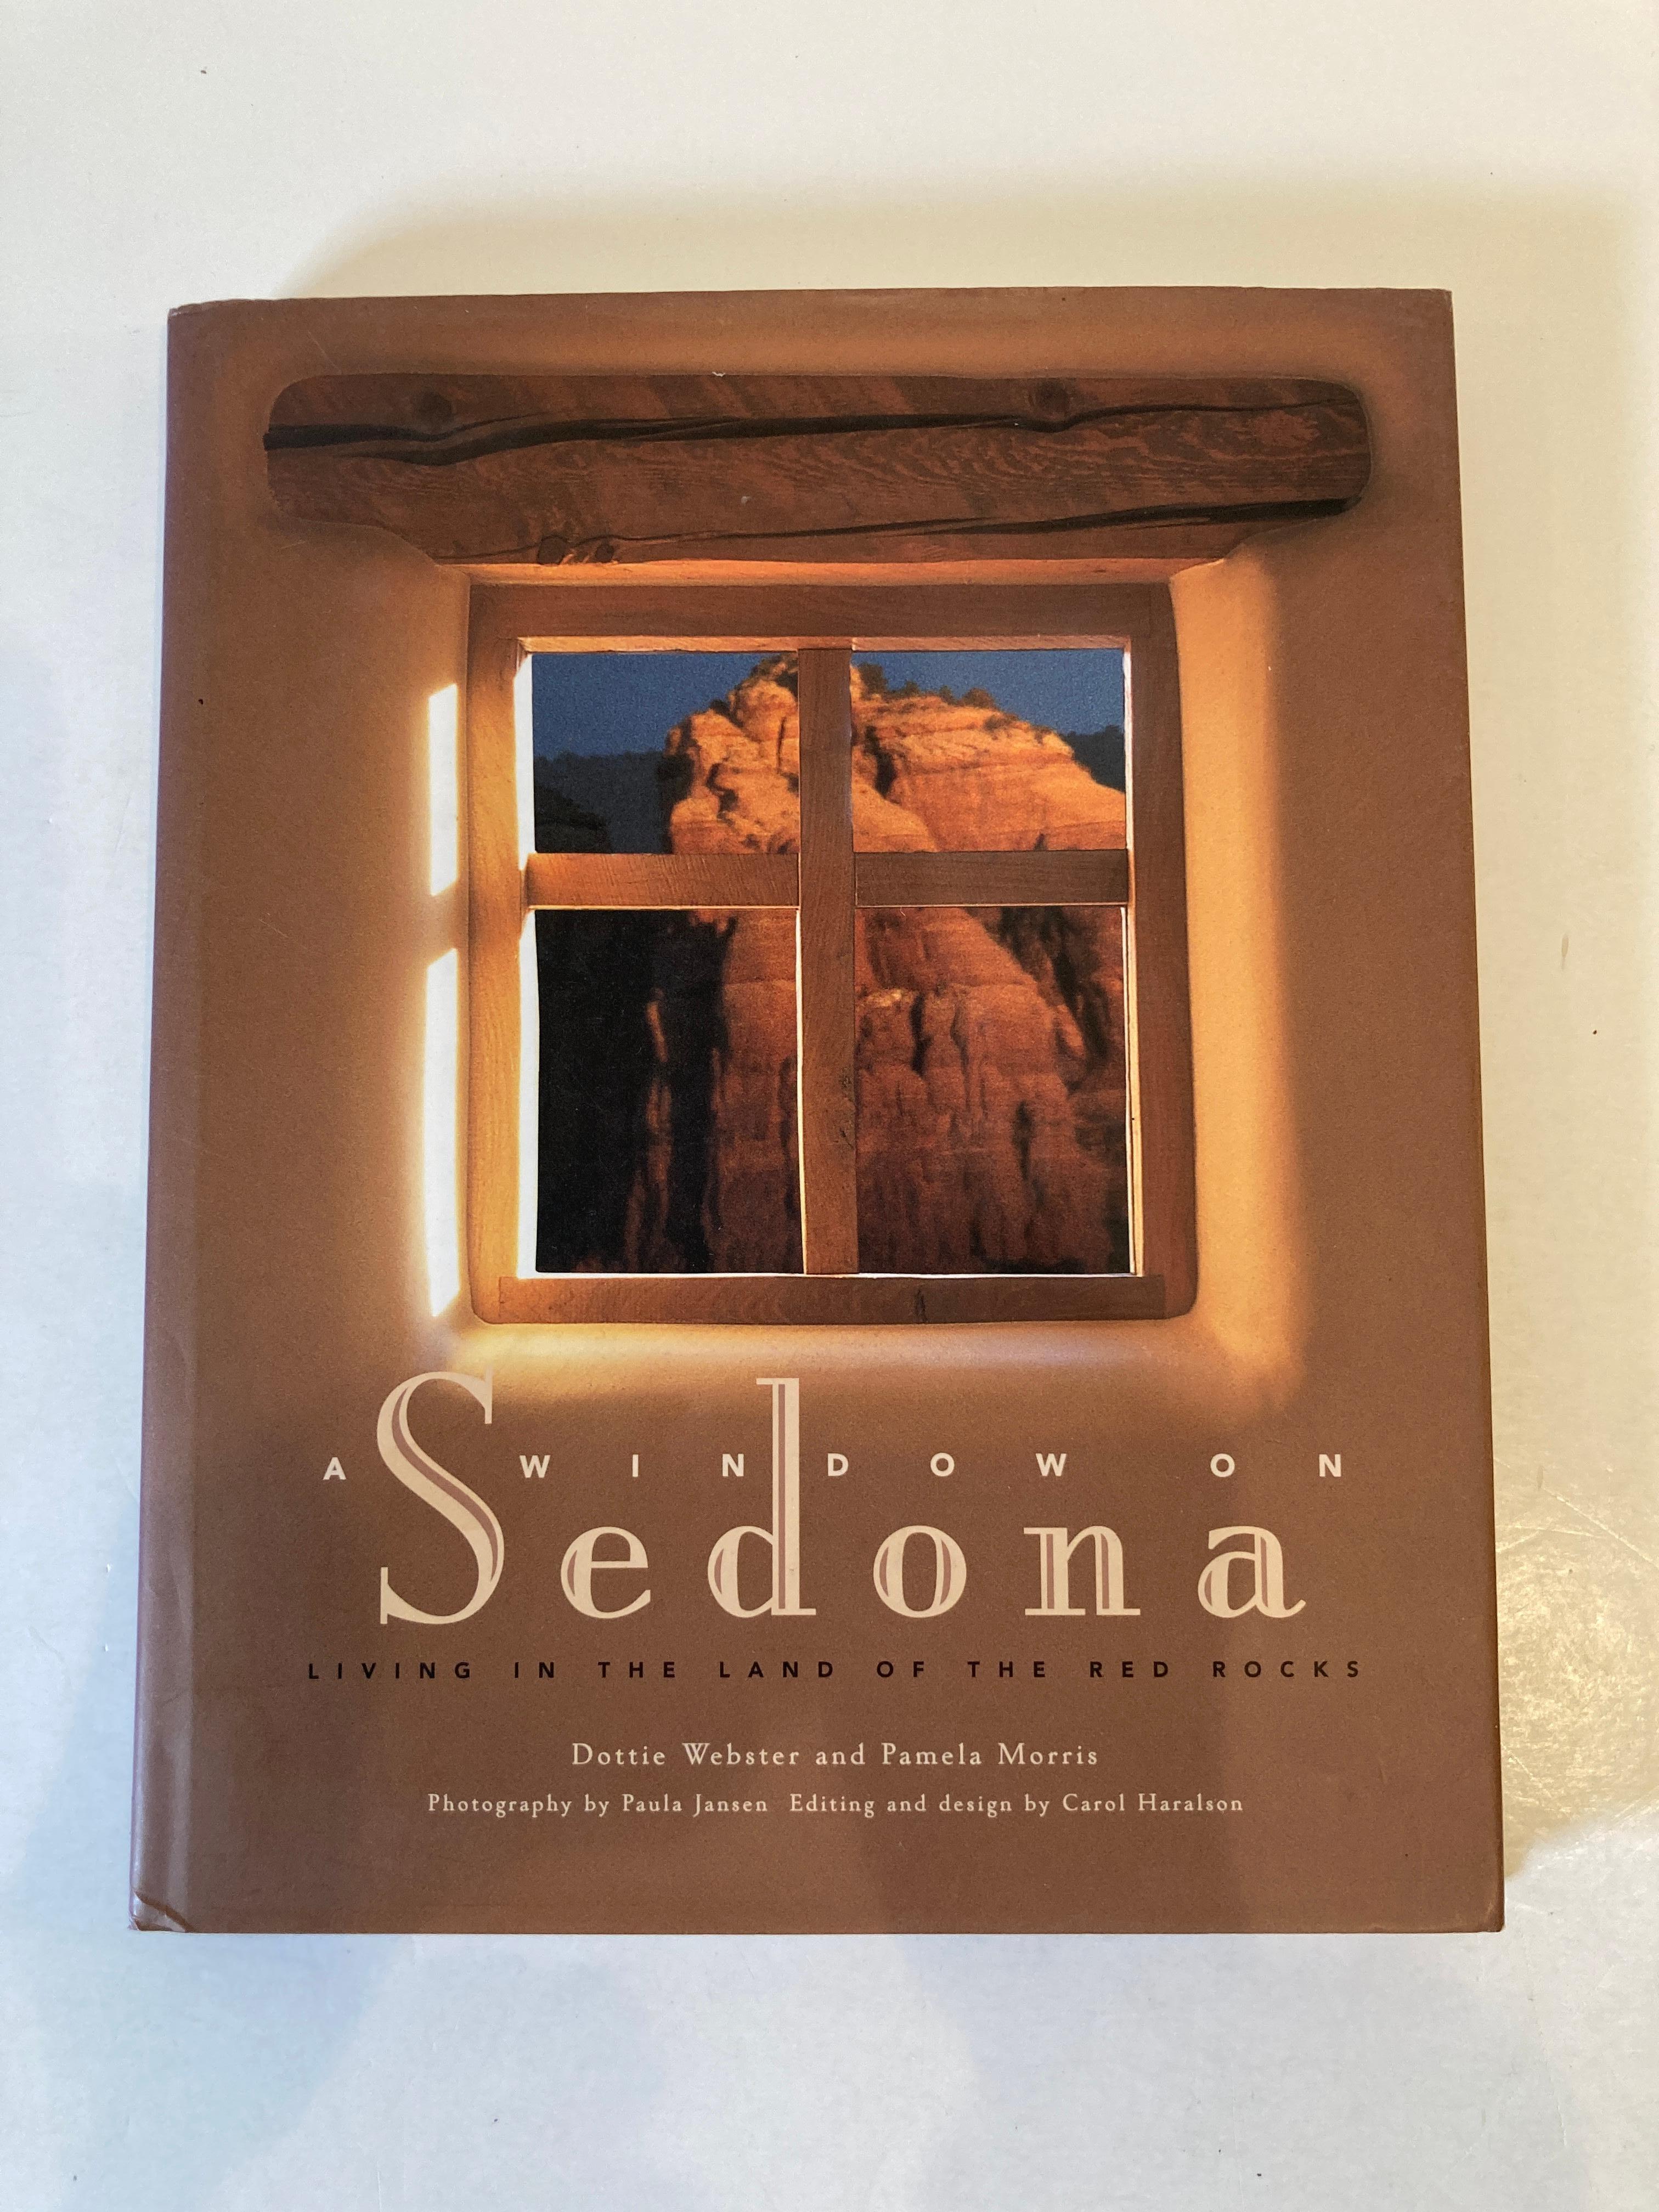 A Window on Sedona: Living in the Land of the Red Rocks
by Dottie Webster.
1st Edition.
If eyes are the 